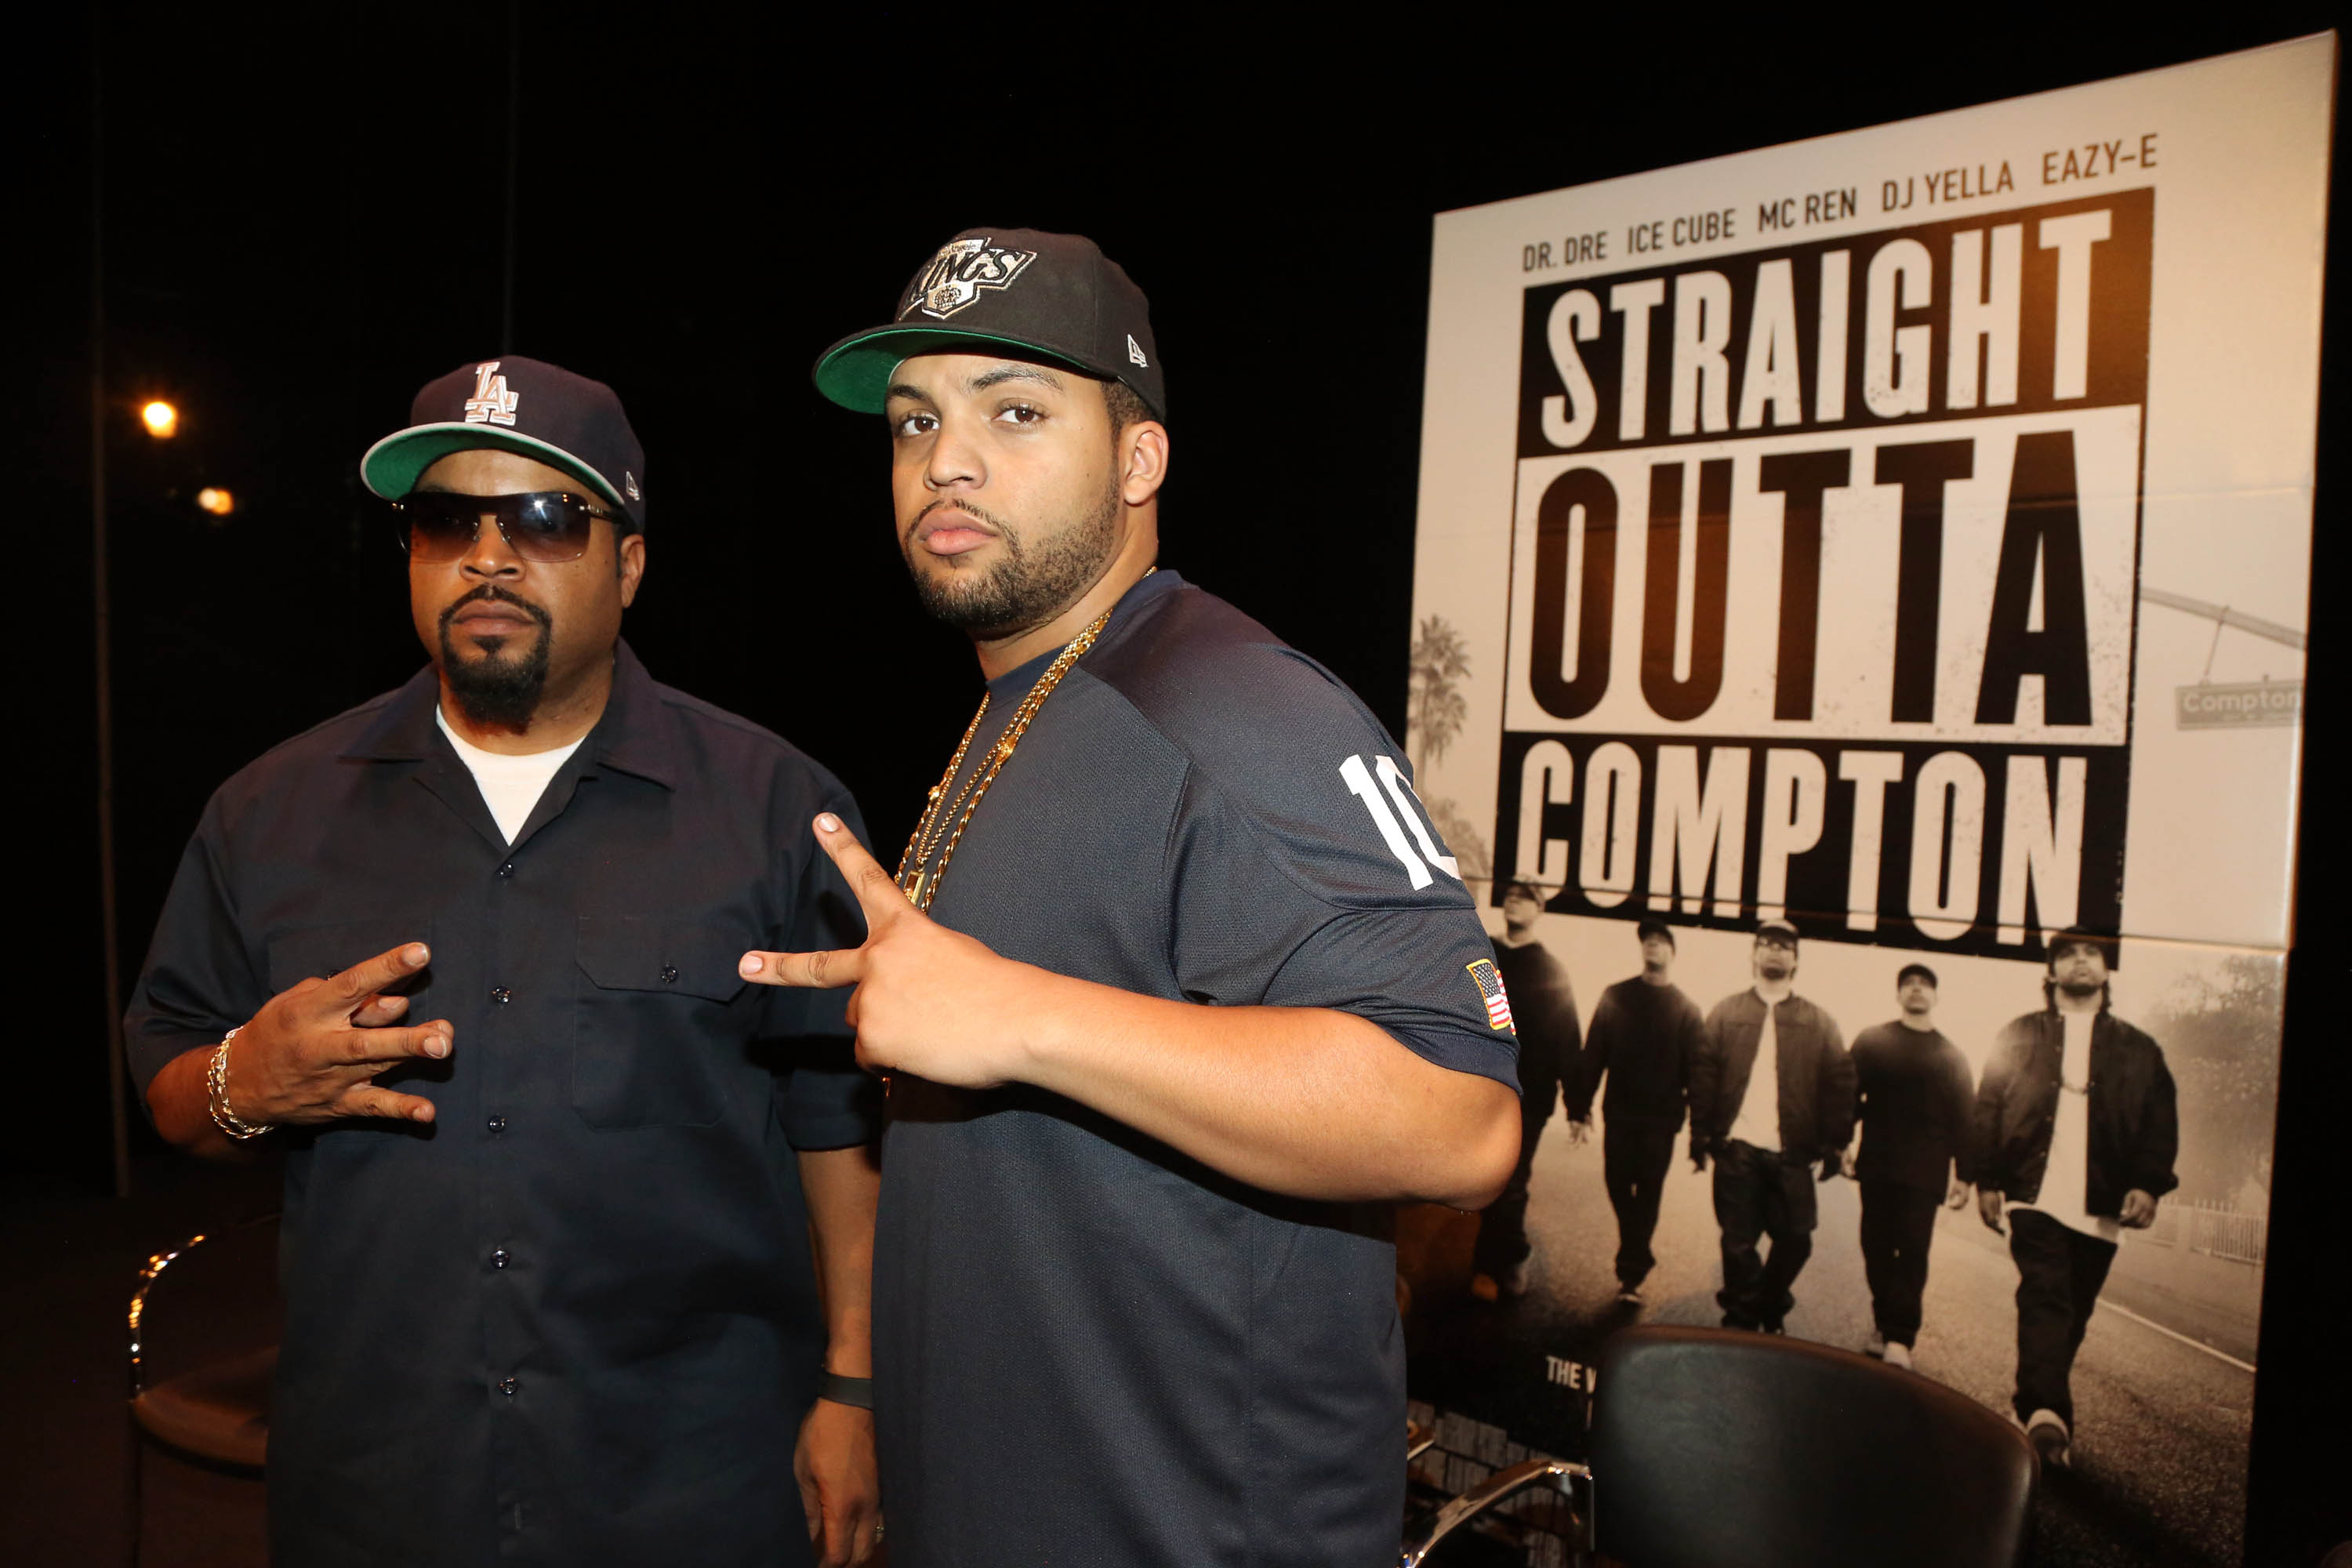 Ice Cube (left) and O'Shea Jackson Jr. attend the 'Straight Outta Compton' New York screening in New York City. (Johnny Nunez—Getty Images)